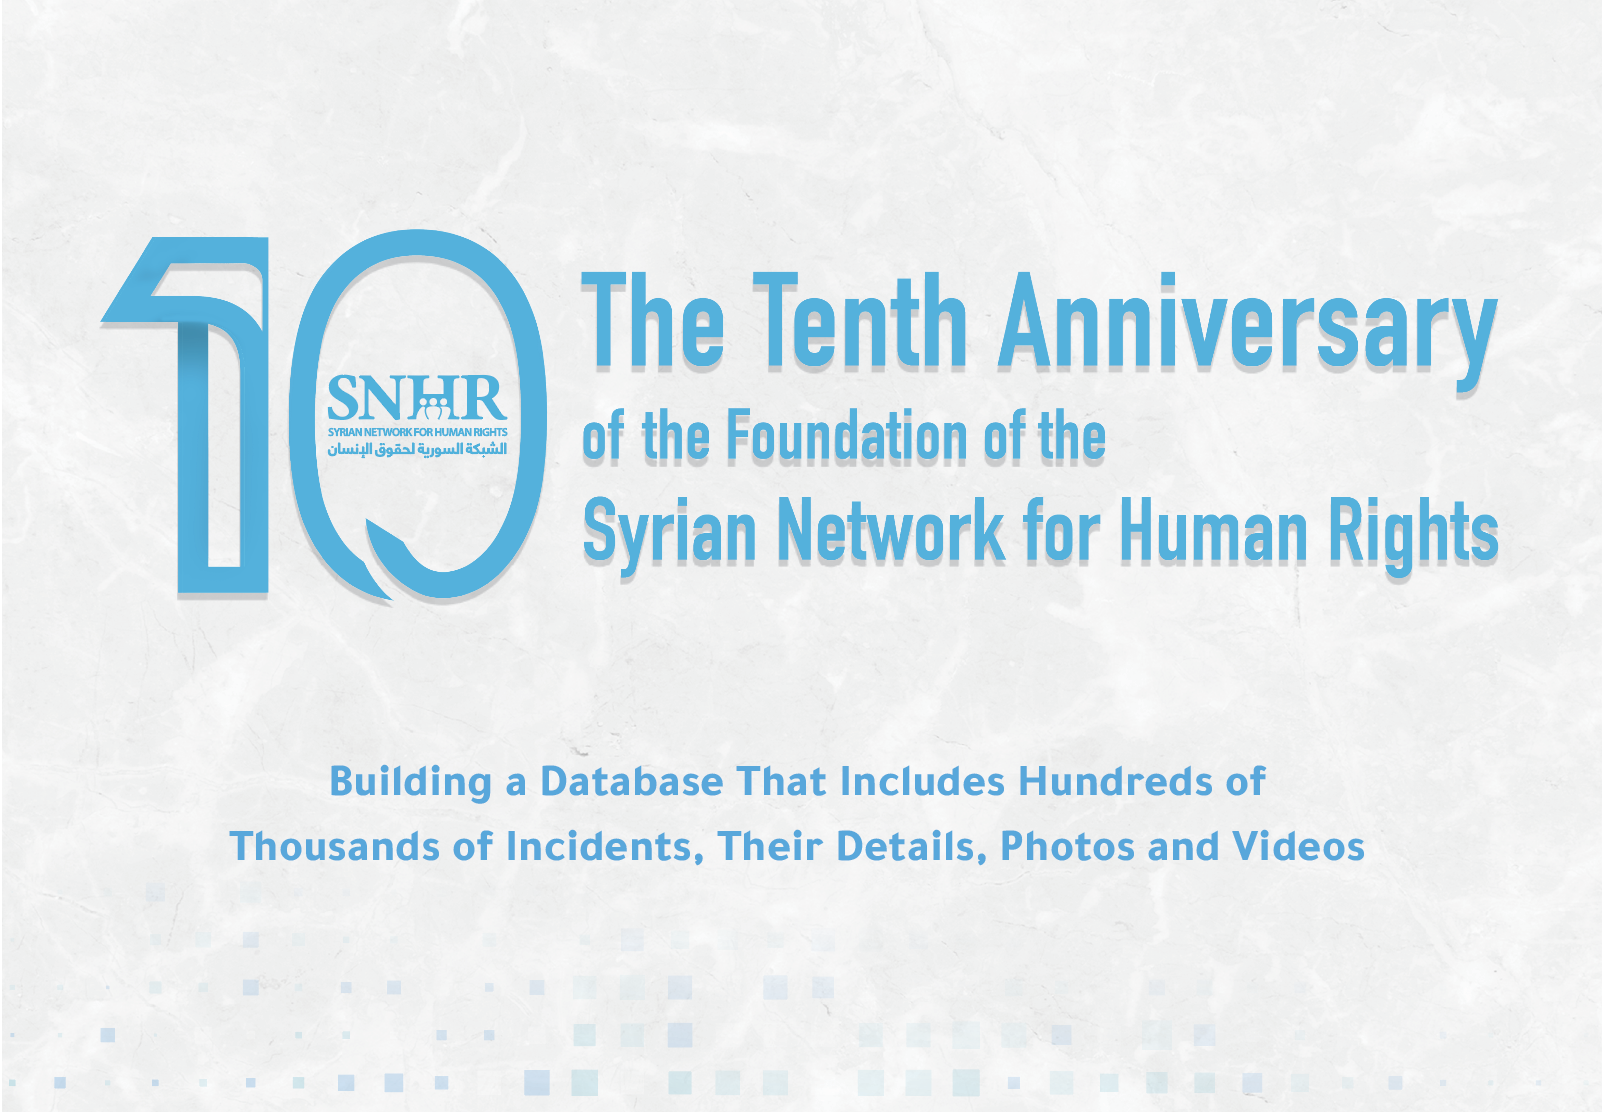 10 Anniversary of the Foundation of the Syrian Network for Human Rights